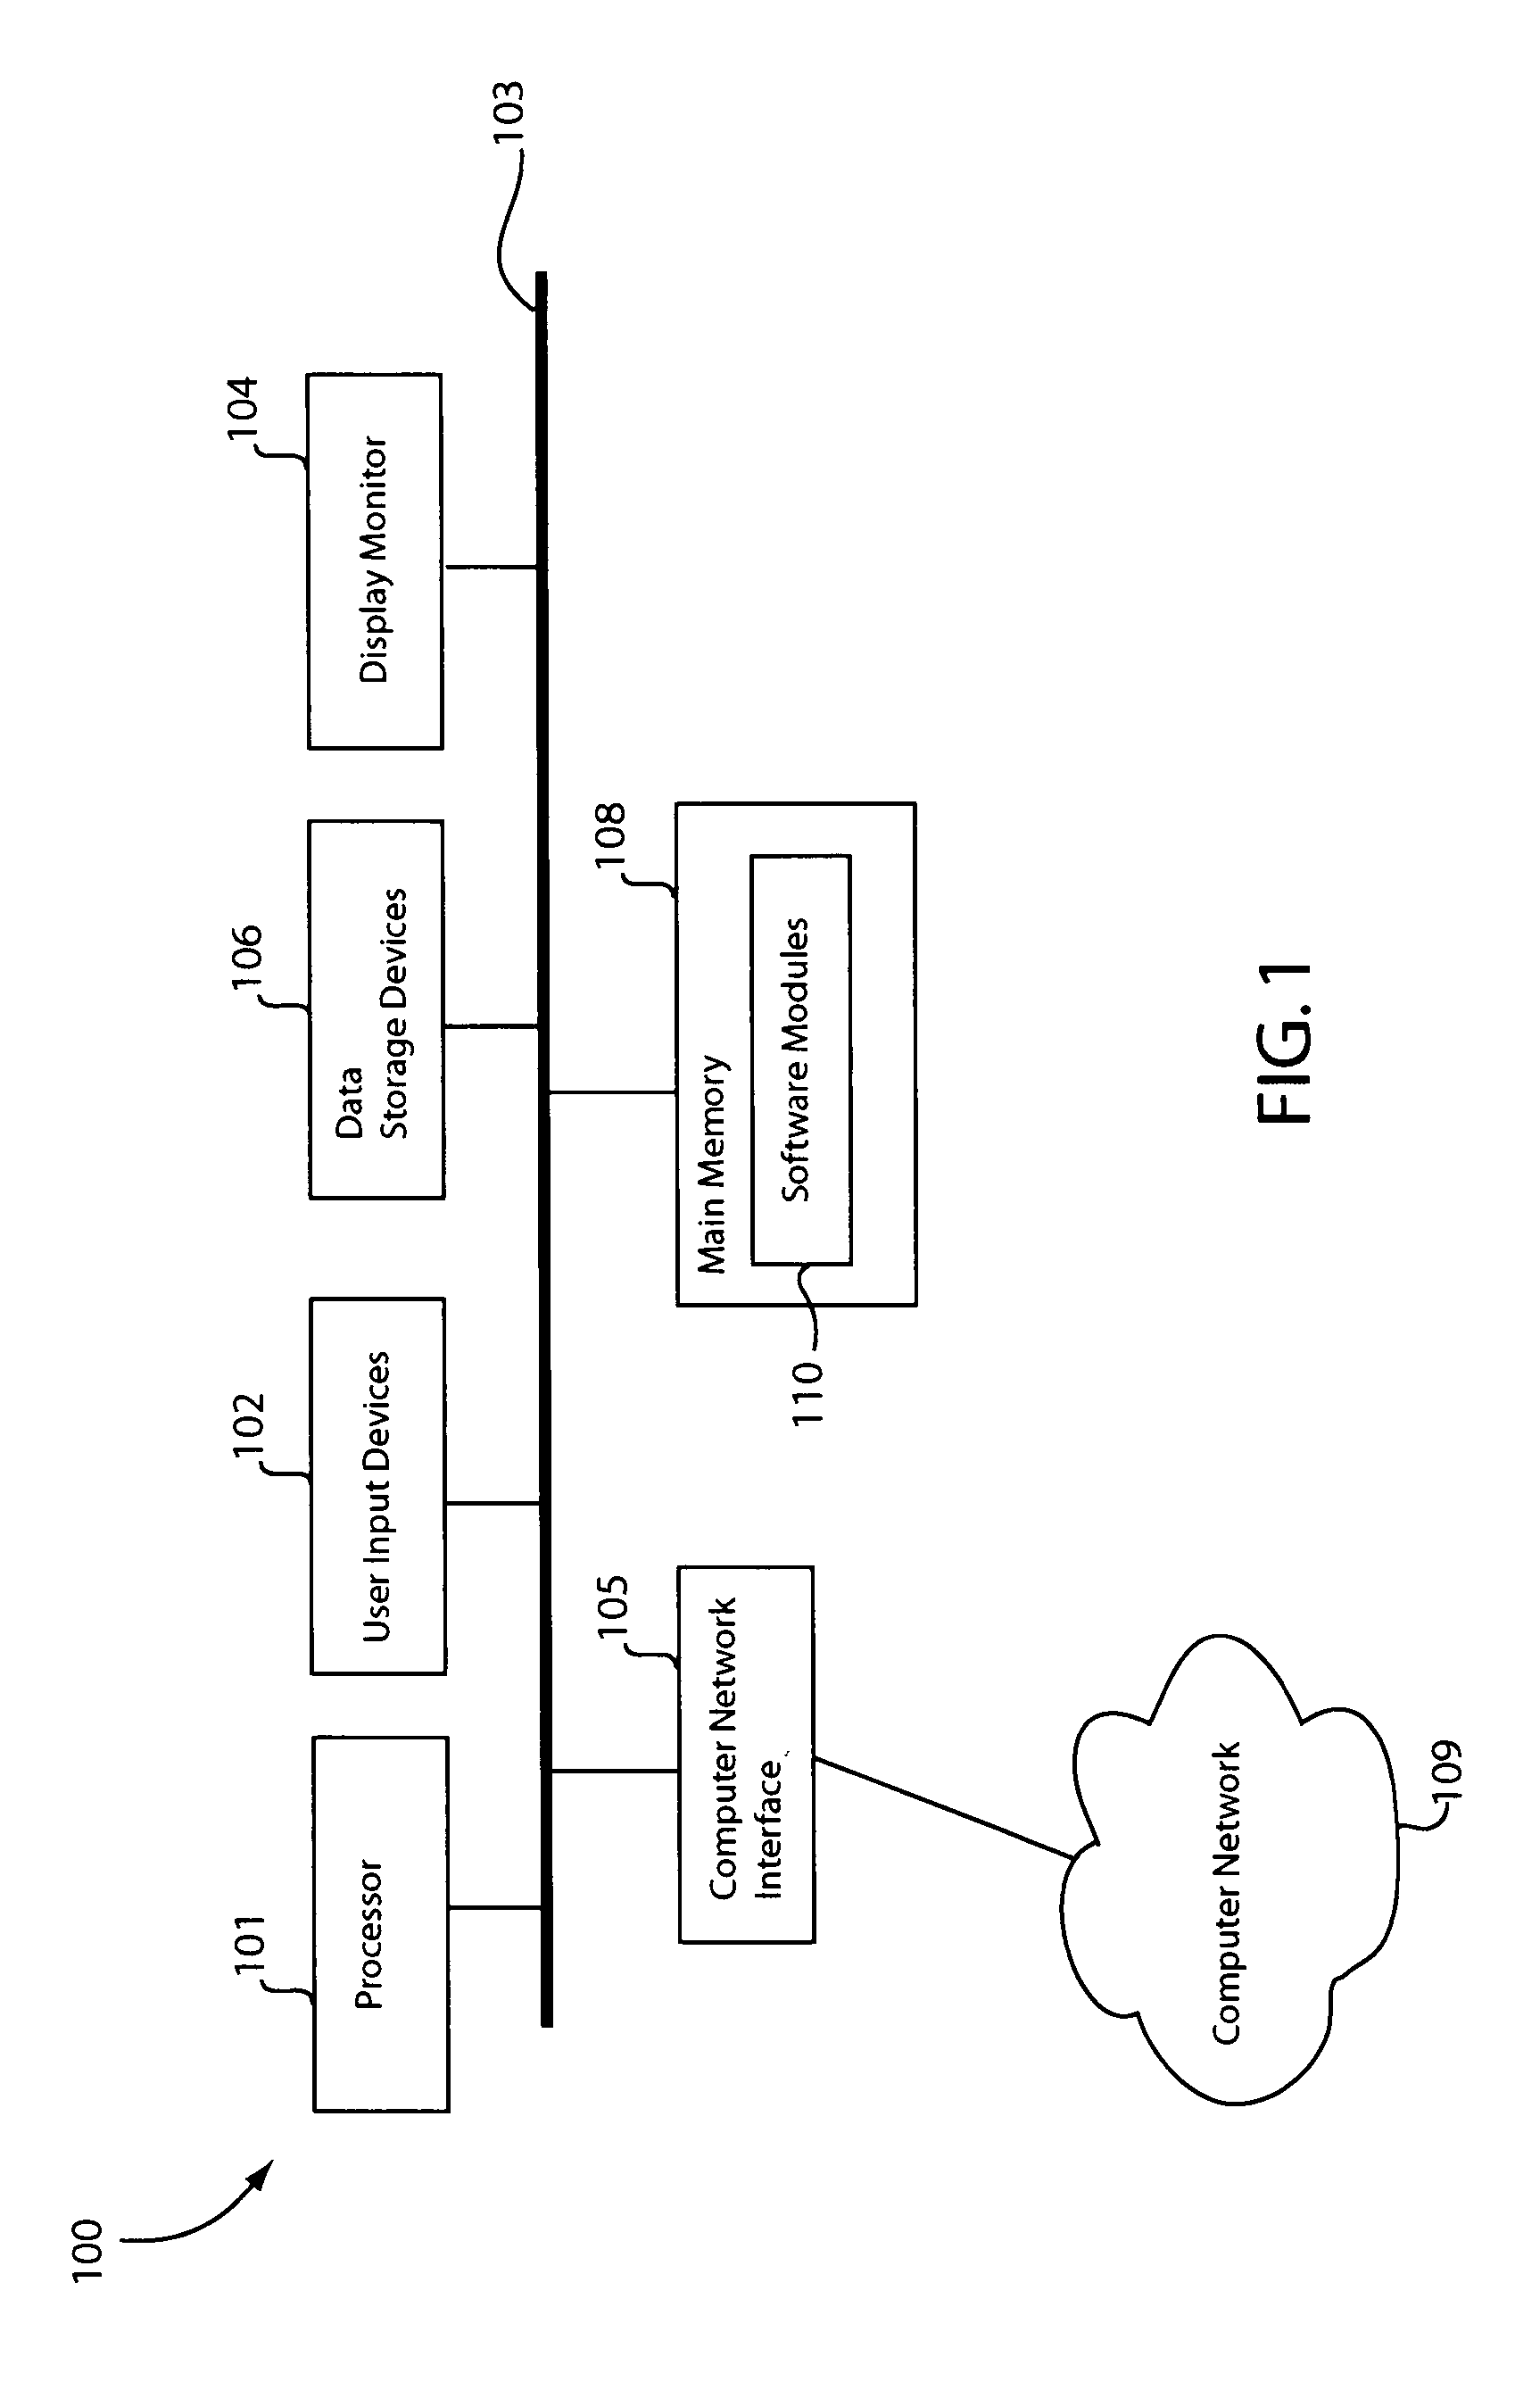 Delegation of content filtering services between a gateway and trusted clients in a computer network